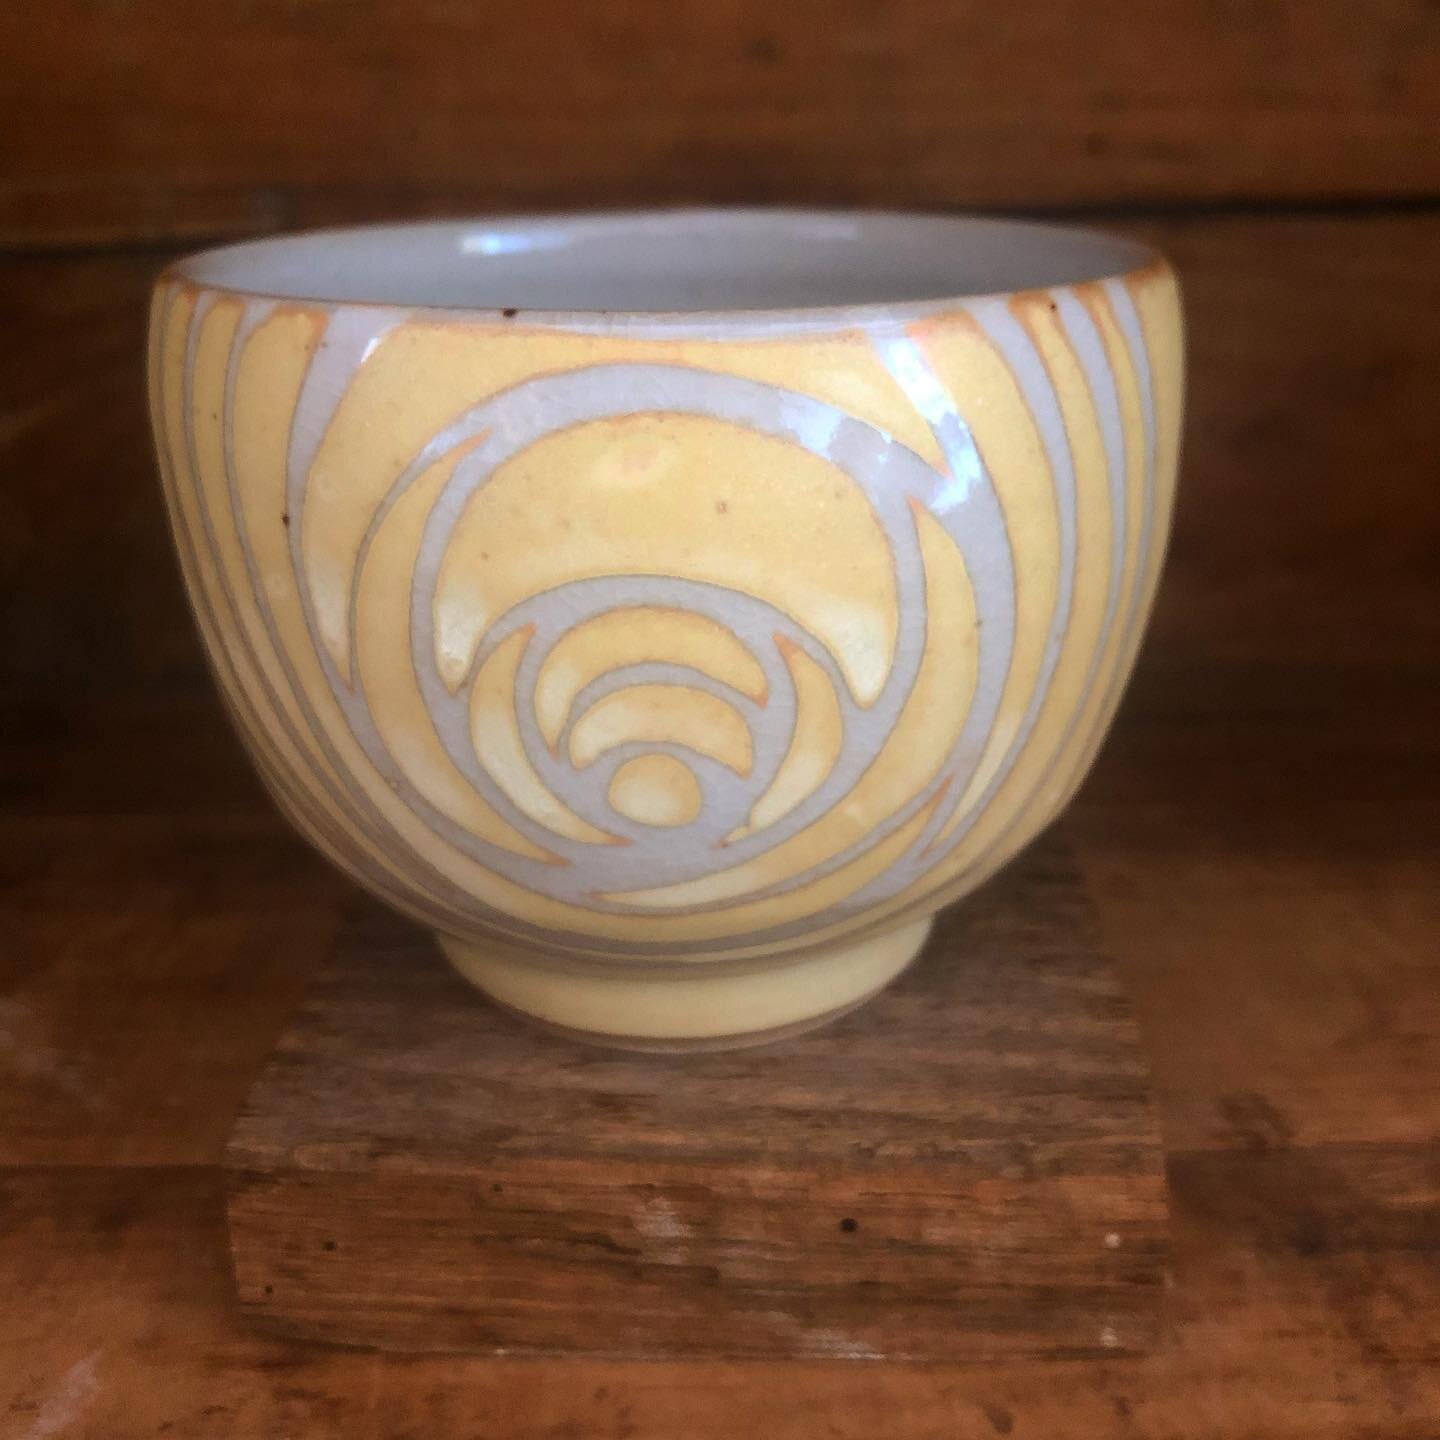 I&rsquo;ll have a packed kiln in a few days for @marshallhandmademarket, so I was stoked to get a bunch of cups in a friend&rsquo;s firing a few days ago. I looooove these toasty cream ones! They seem to be begging for a scoop of vanilla ice cream 🤍